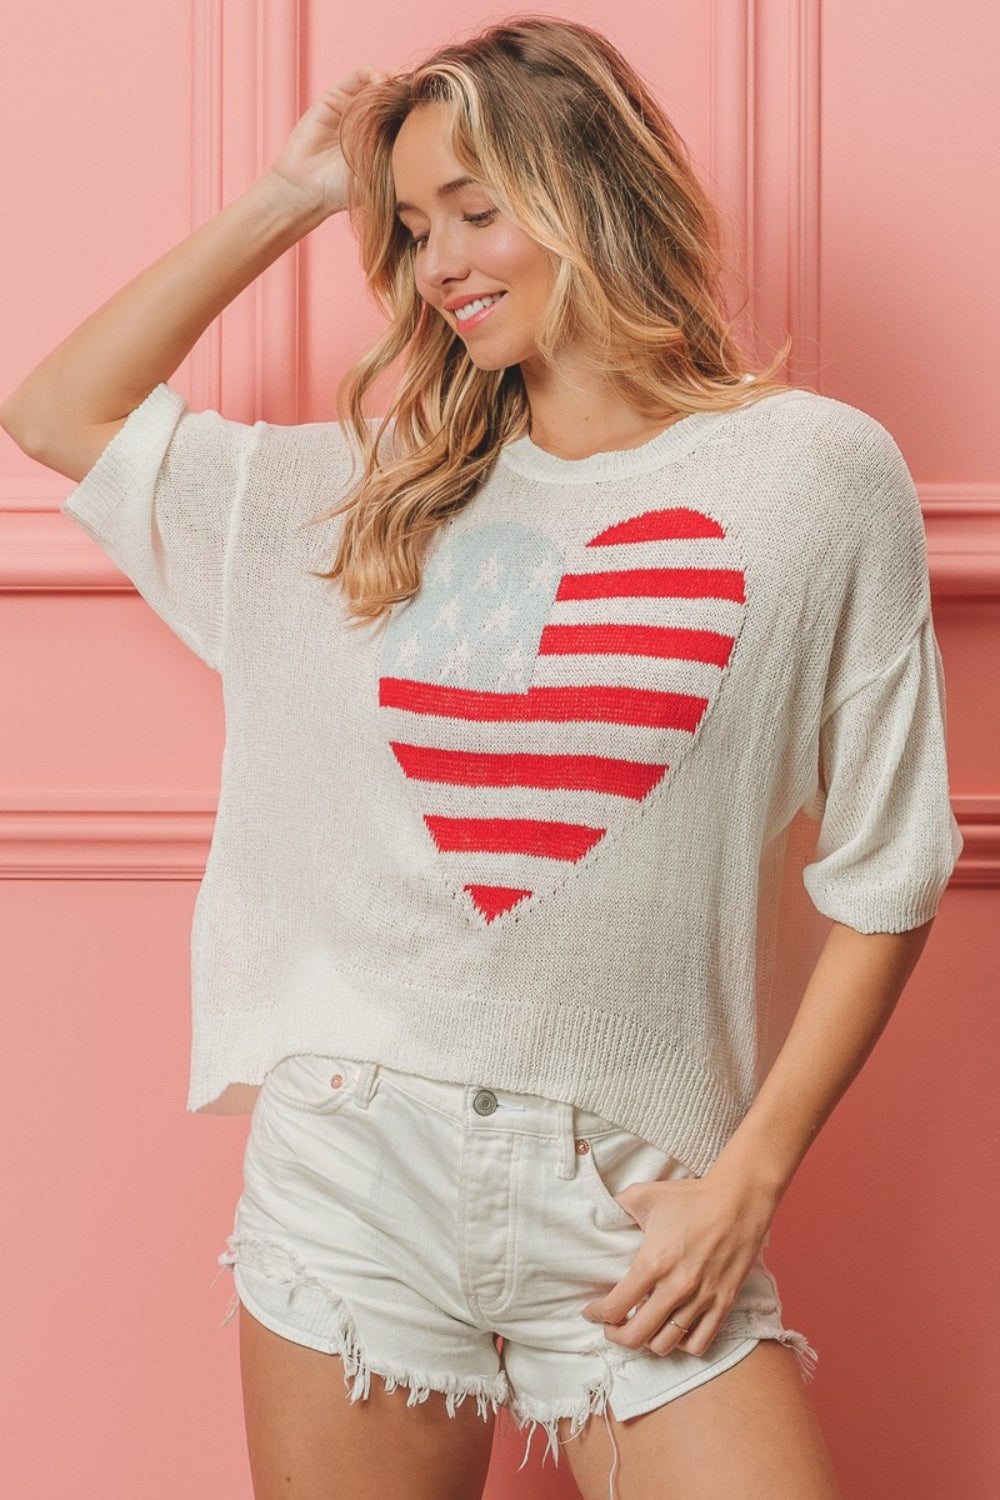 BiBi Striped Heart Contrast Knit Top Sunset and Swim Off White S 